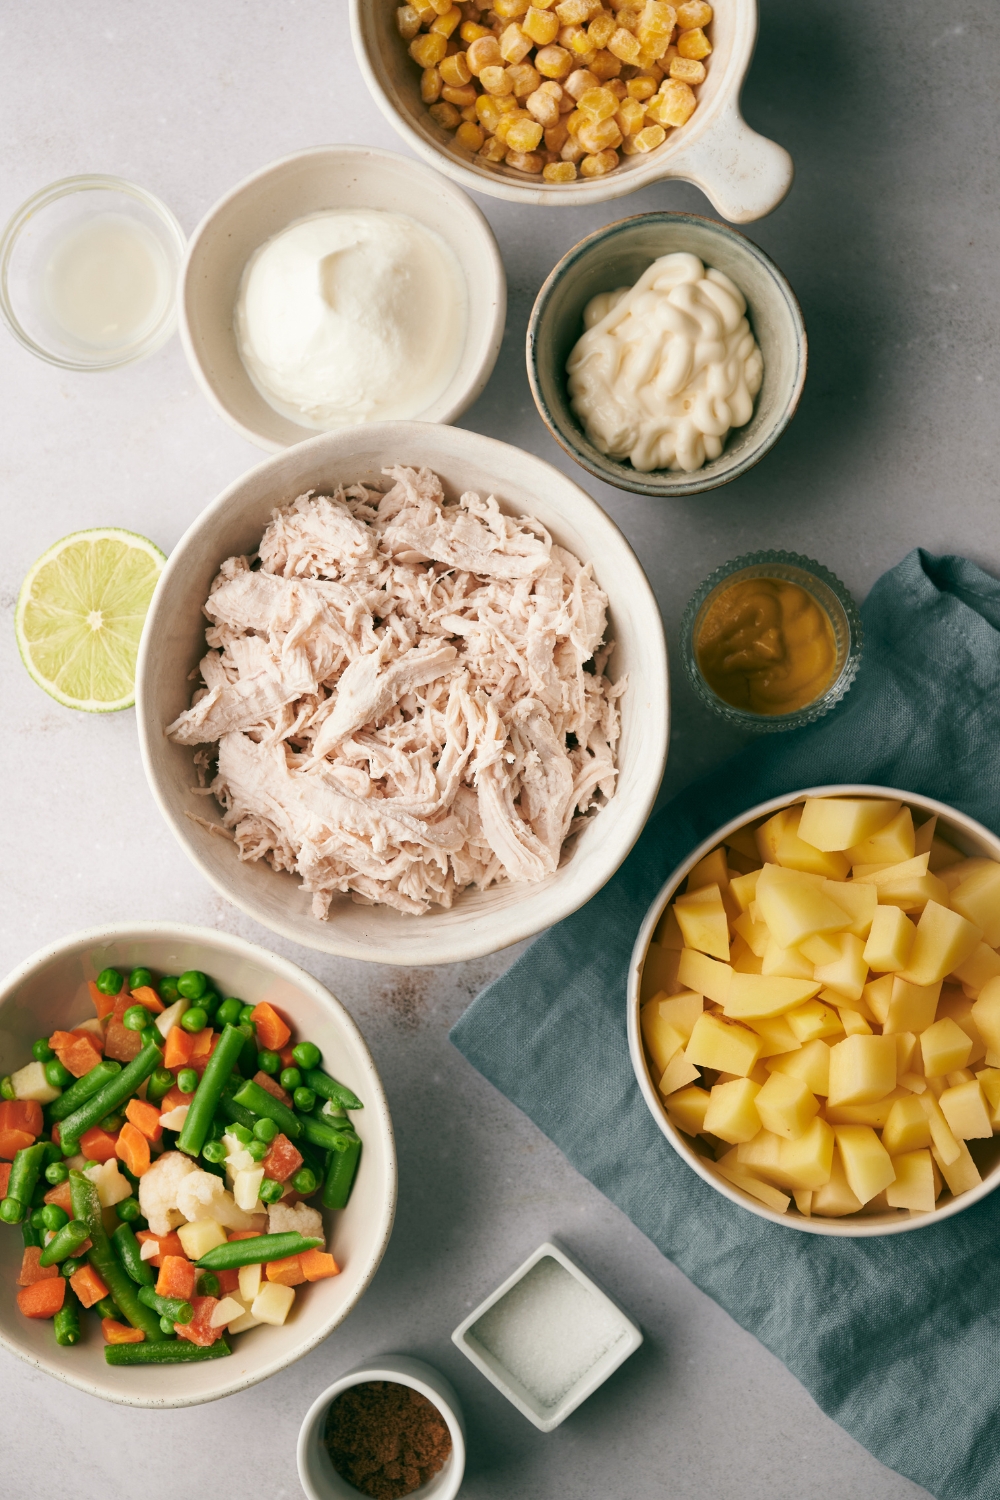 Corn, diced potatoes, mayonnaise, sour cream, shredded chicken, mixed vegetables and seasonings are in separate bowls on a white counter top.